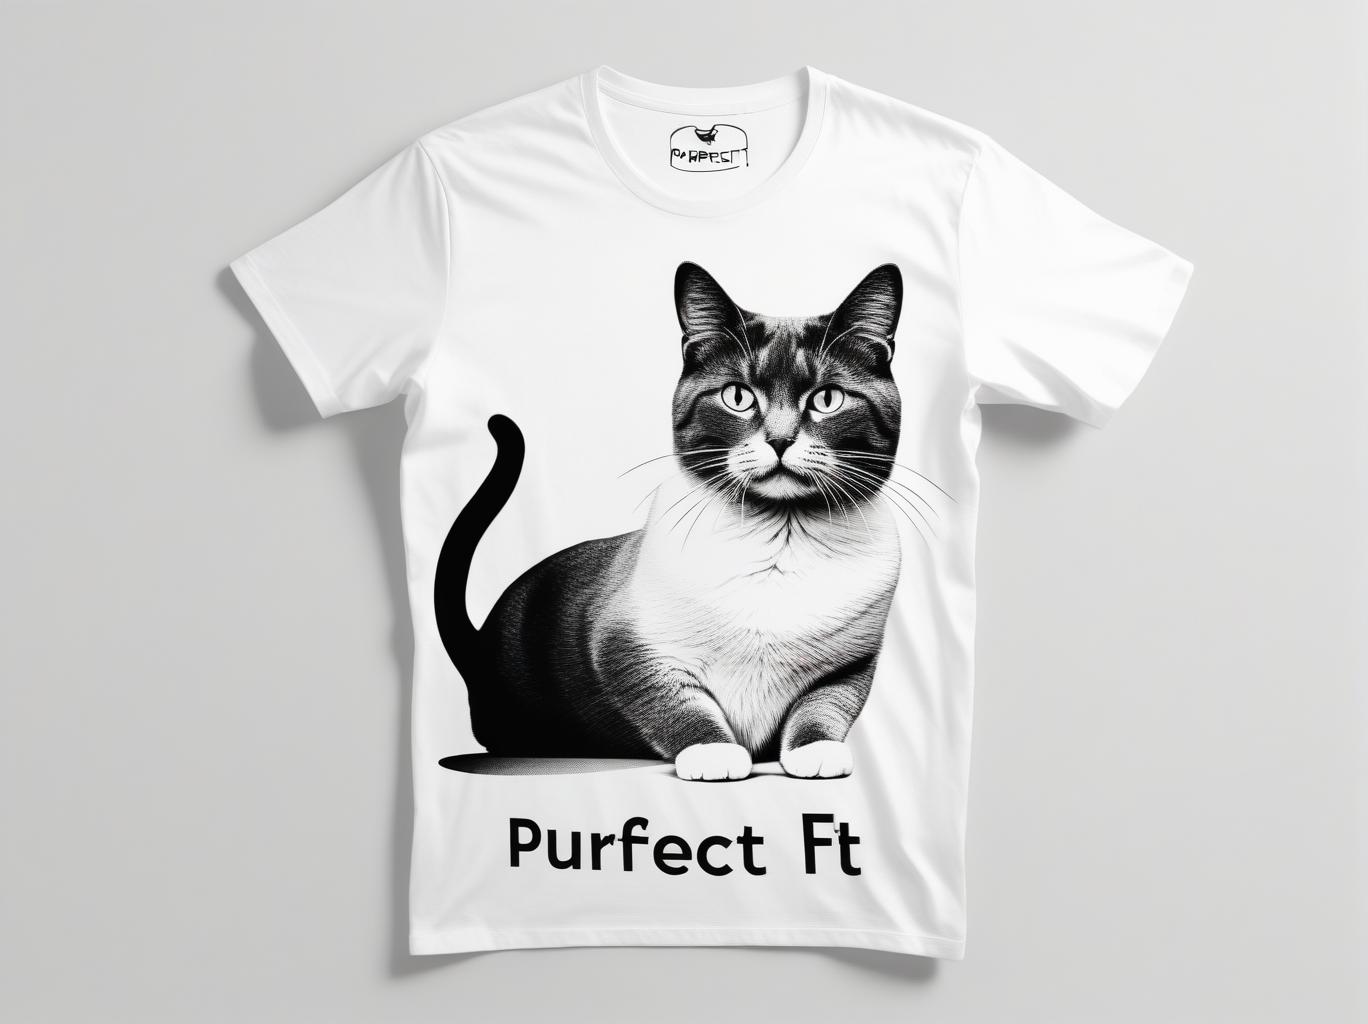  (surrealism style), T-shirt of a minimalistic cat with the written text “PURFECT FIT” written underneath